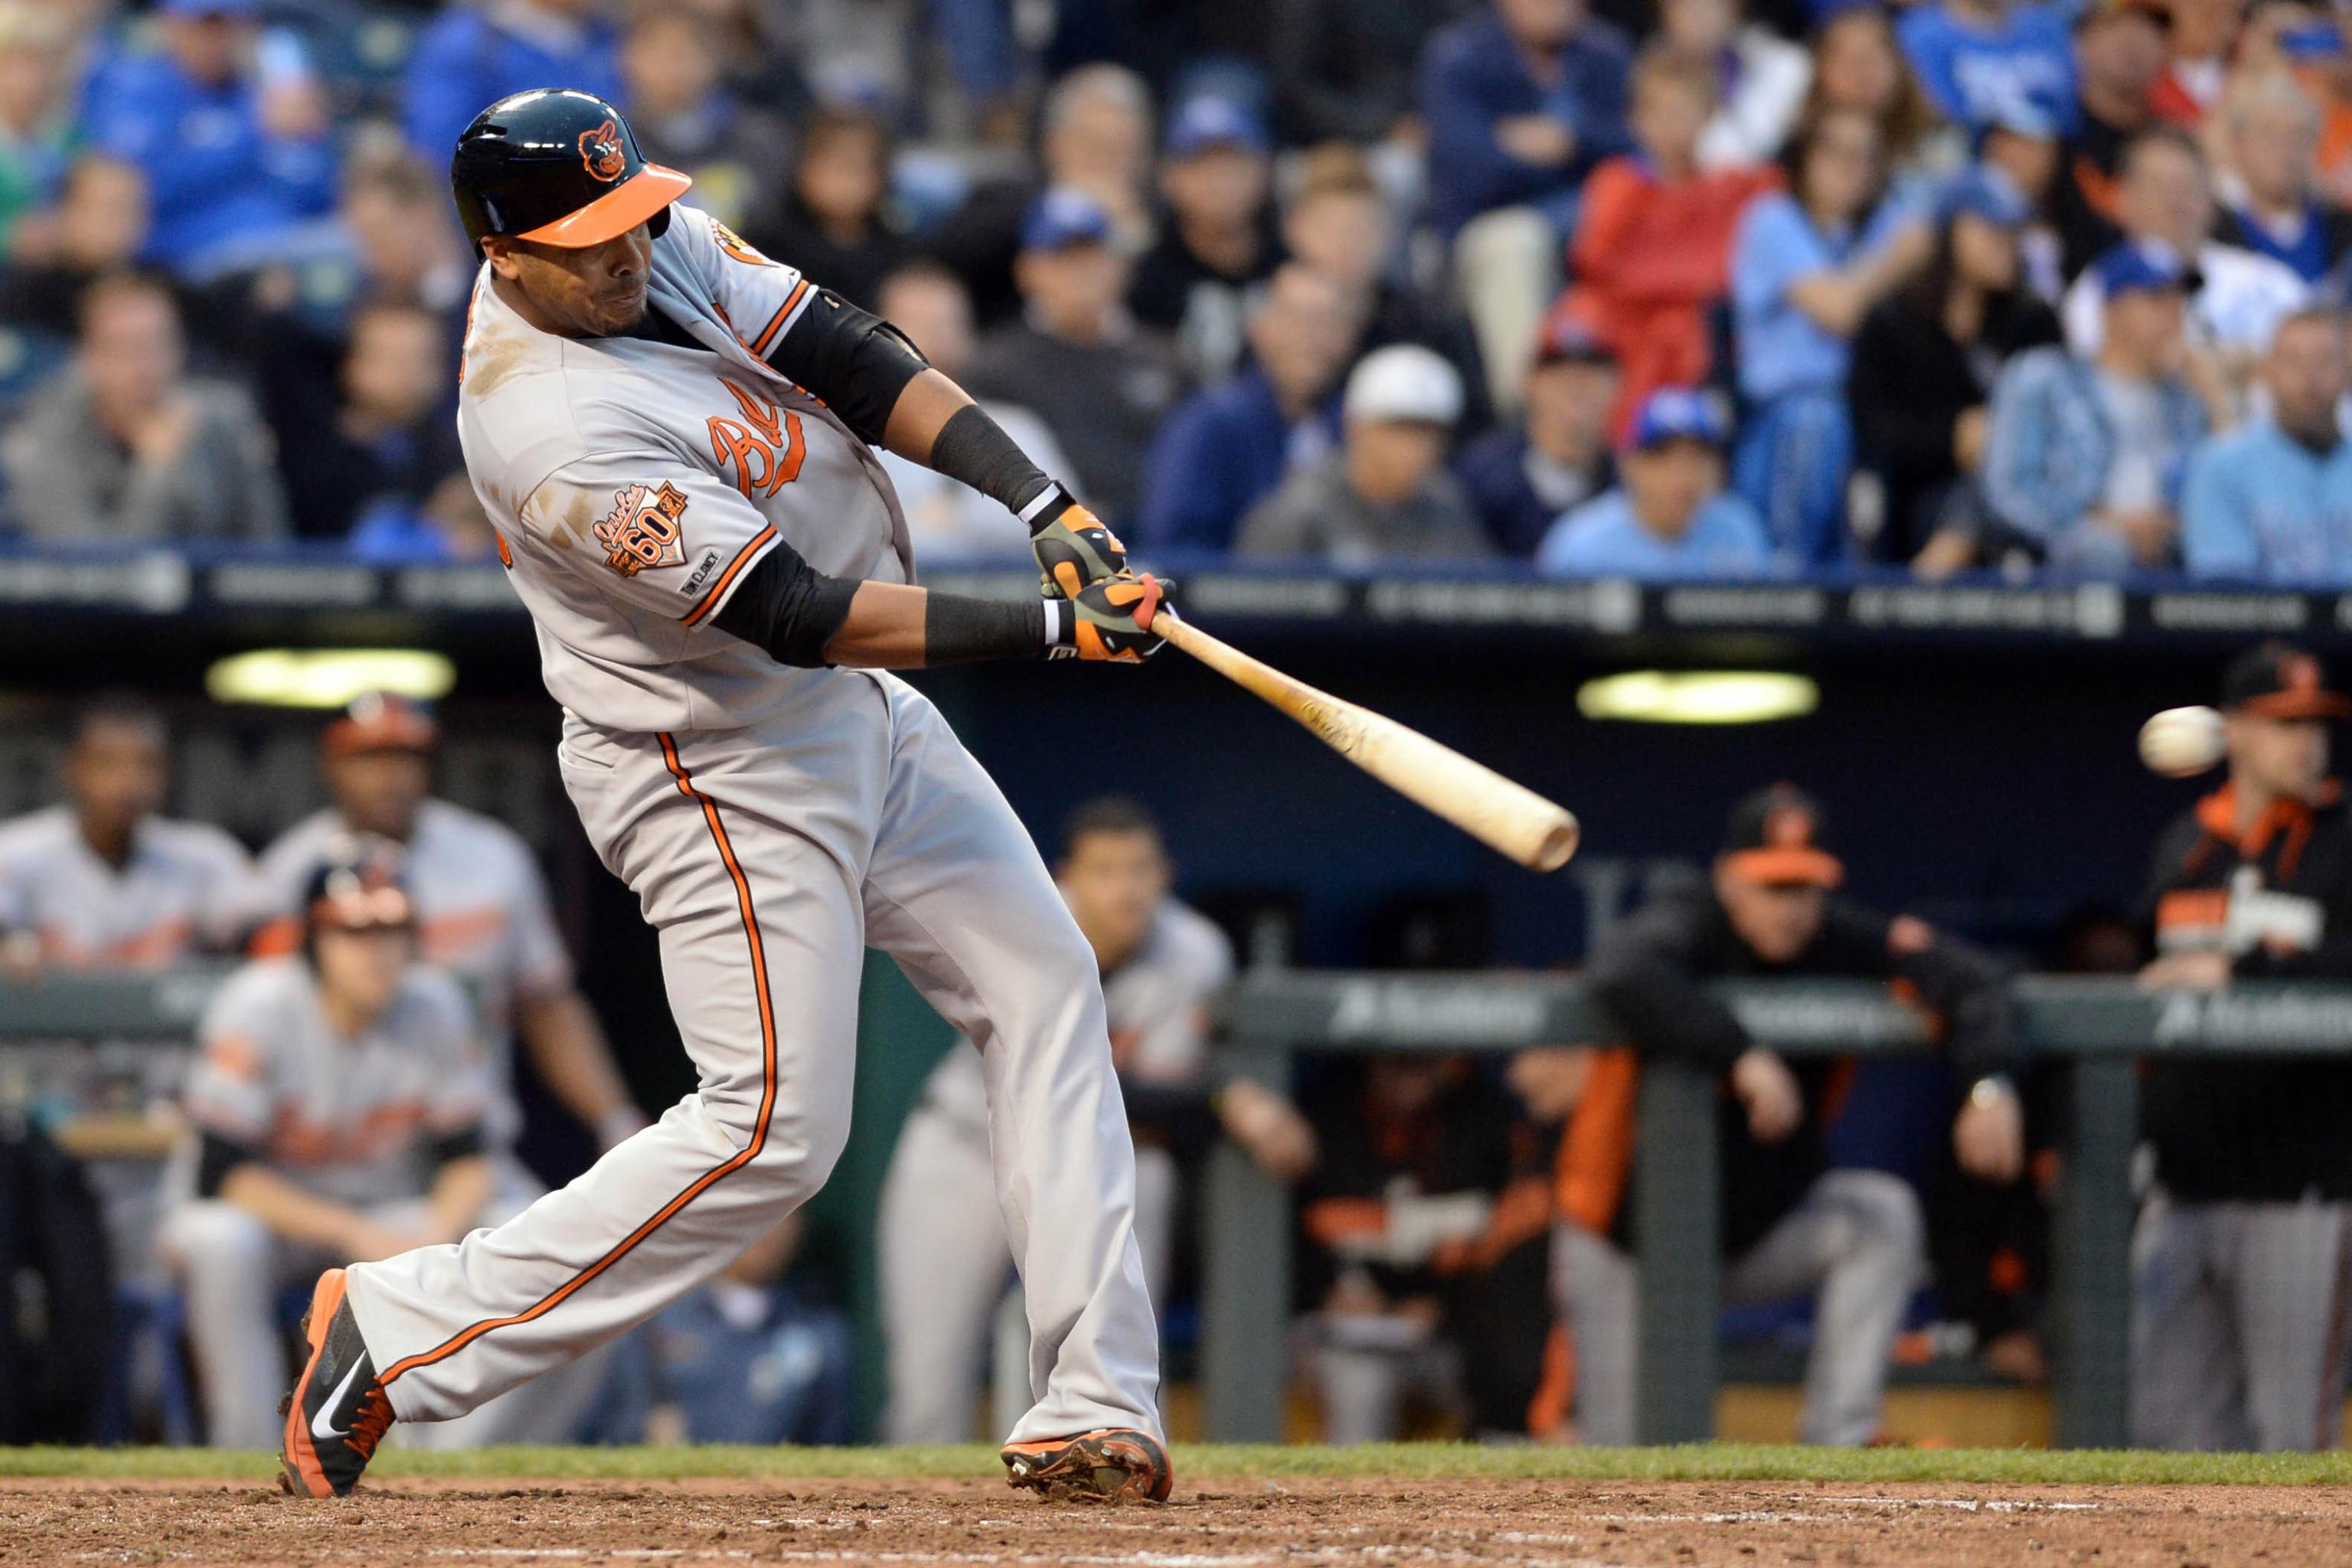 New York Mets: Nelson Cruz Was the Better Option over Young and